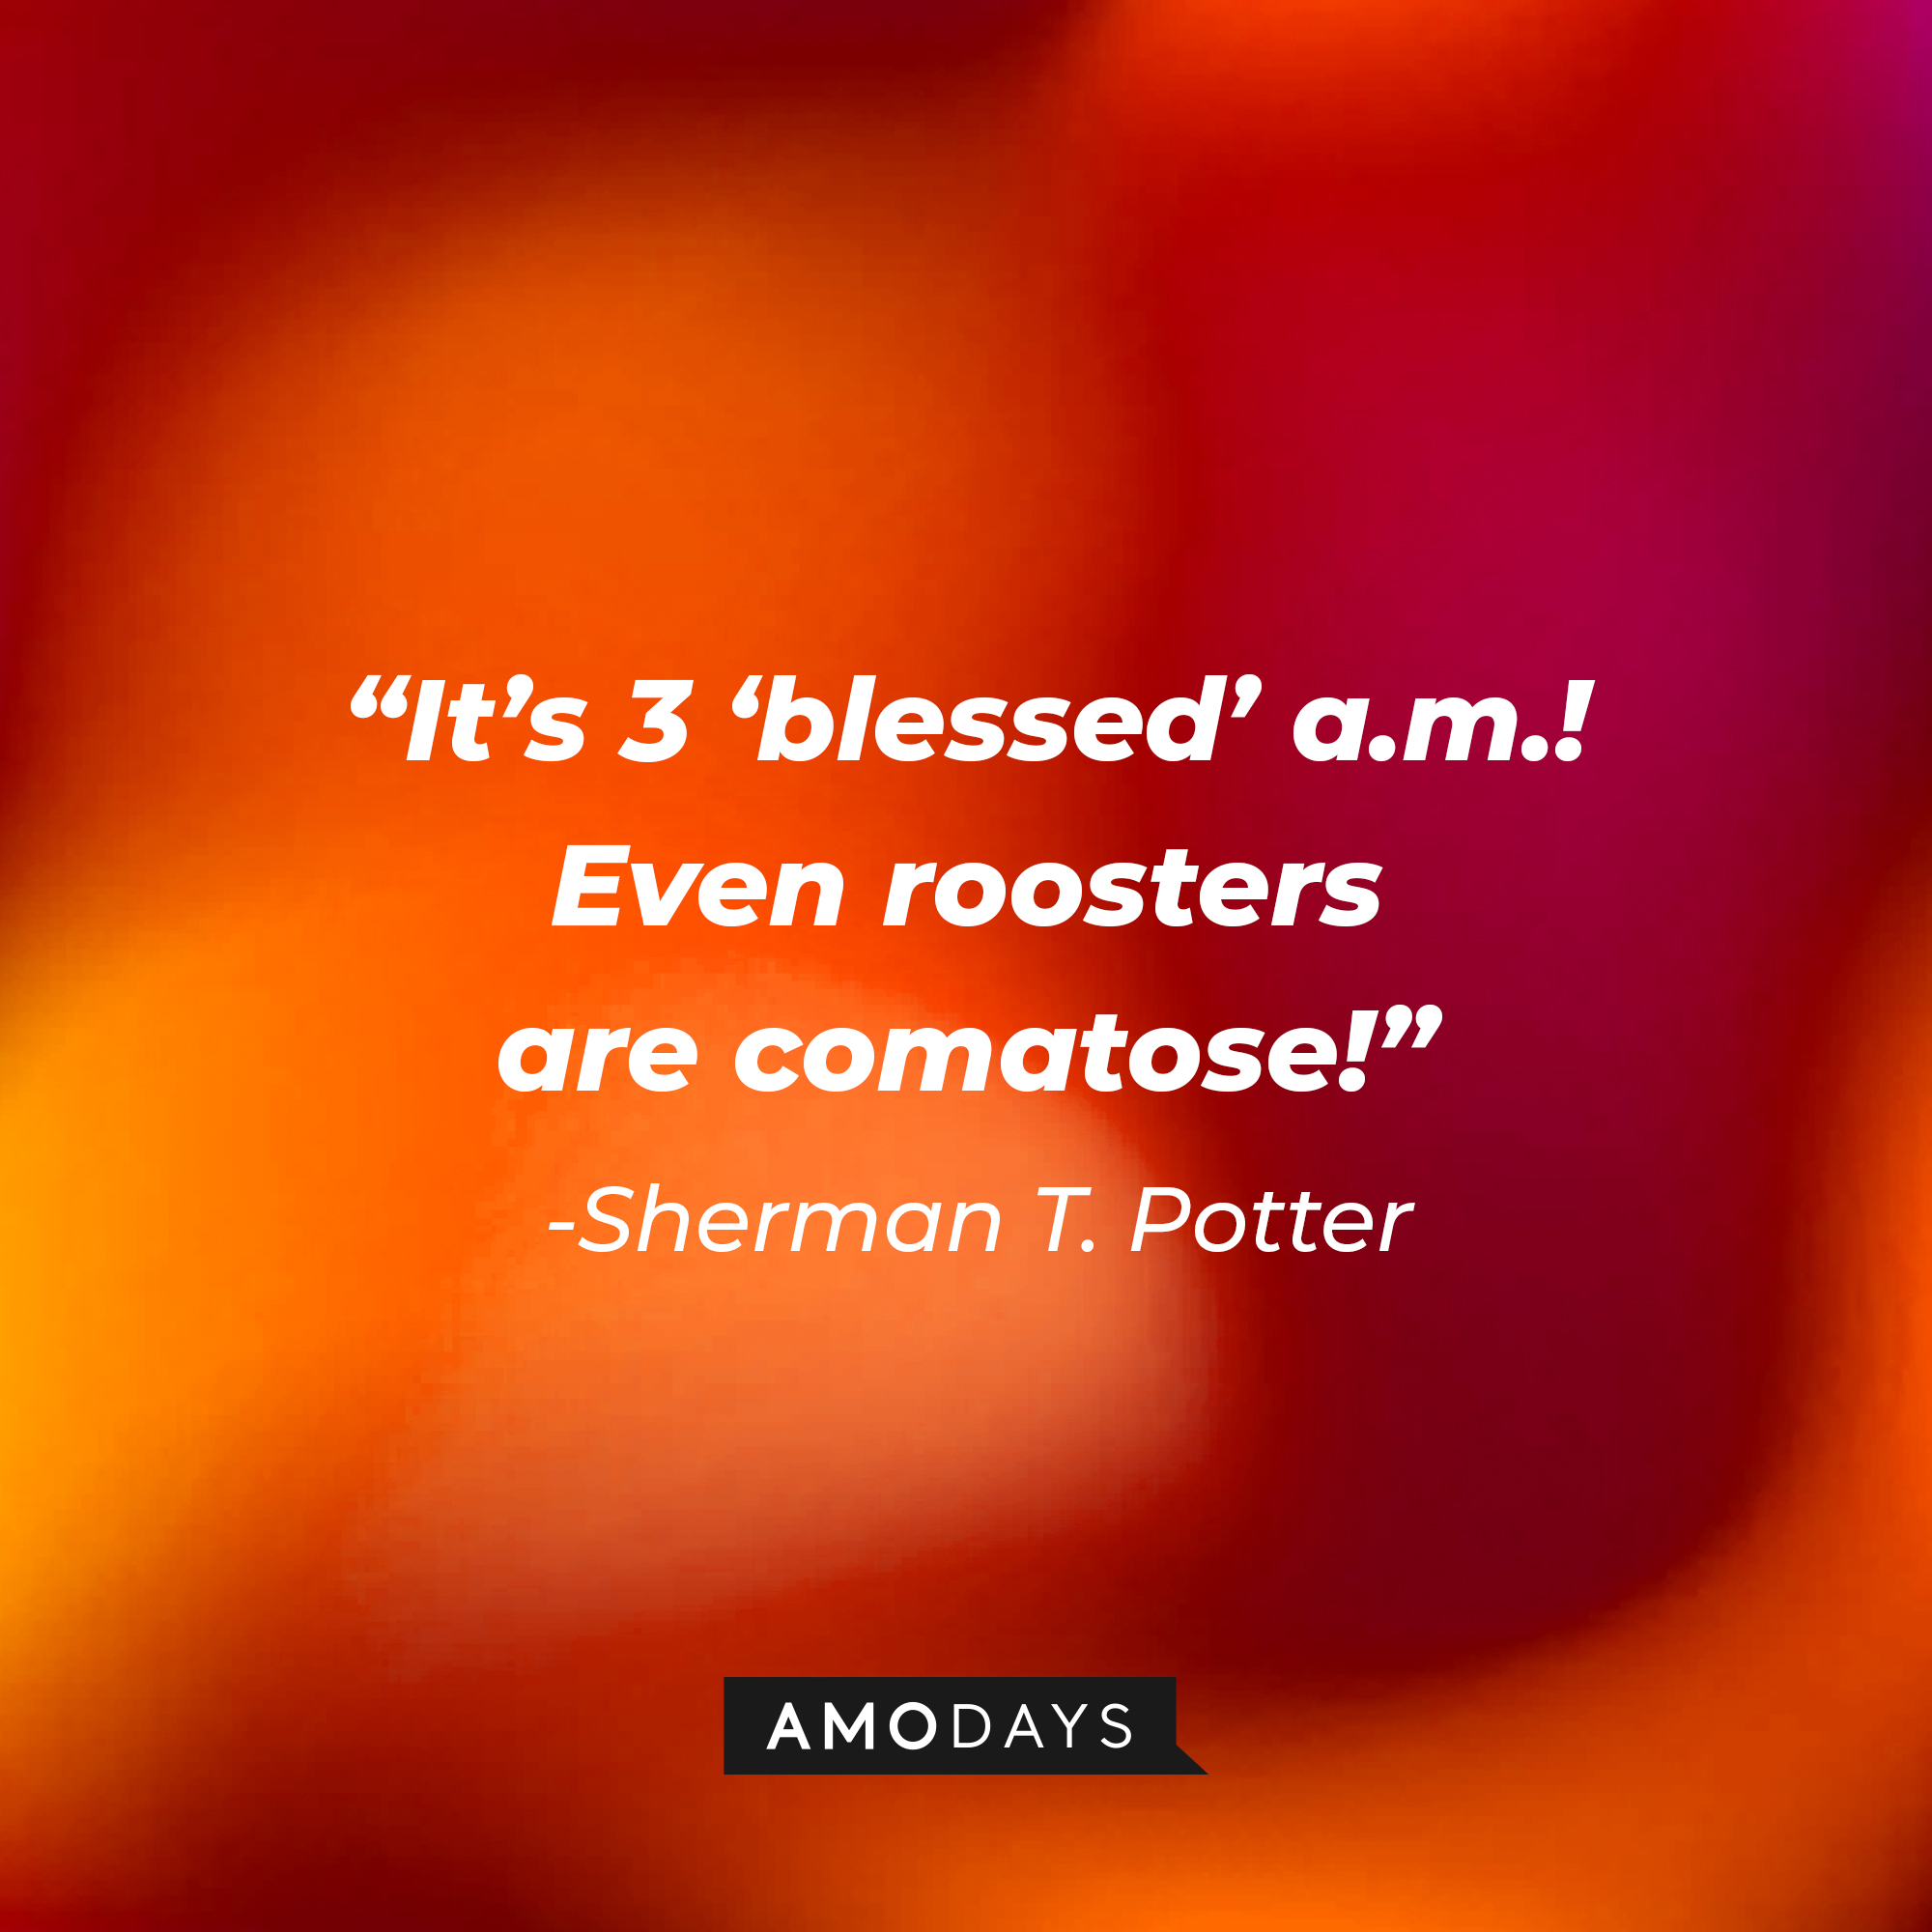 Sherman T. Potter’s quote: “It’s 3 ‘blessed’ a.m.! Even roosters are comatose!” | Source: AmoDays